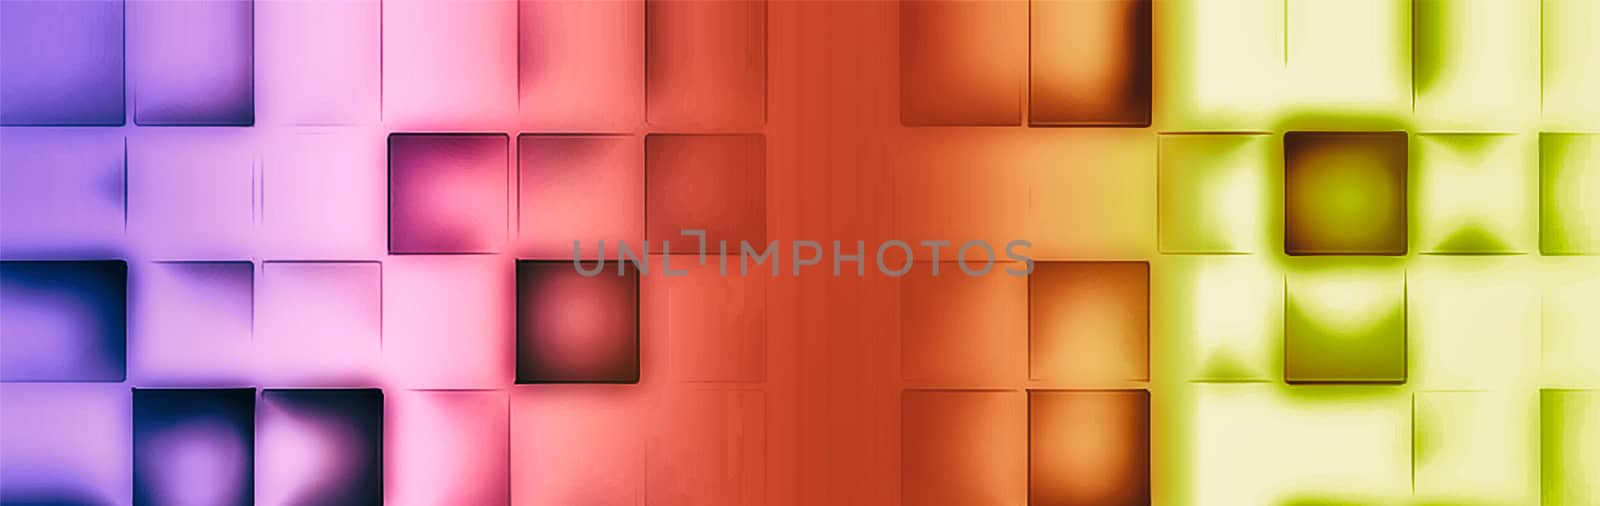 Abstract background for web design with sqares. Colorful gradient.